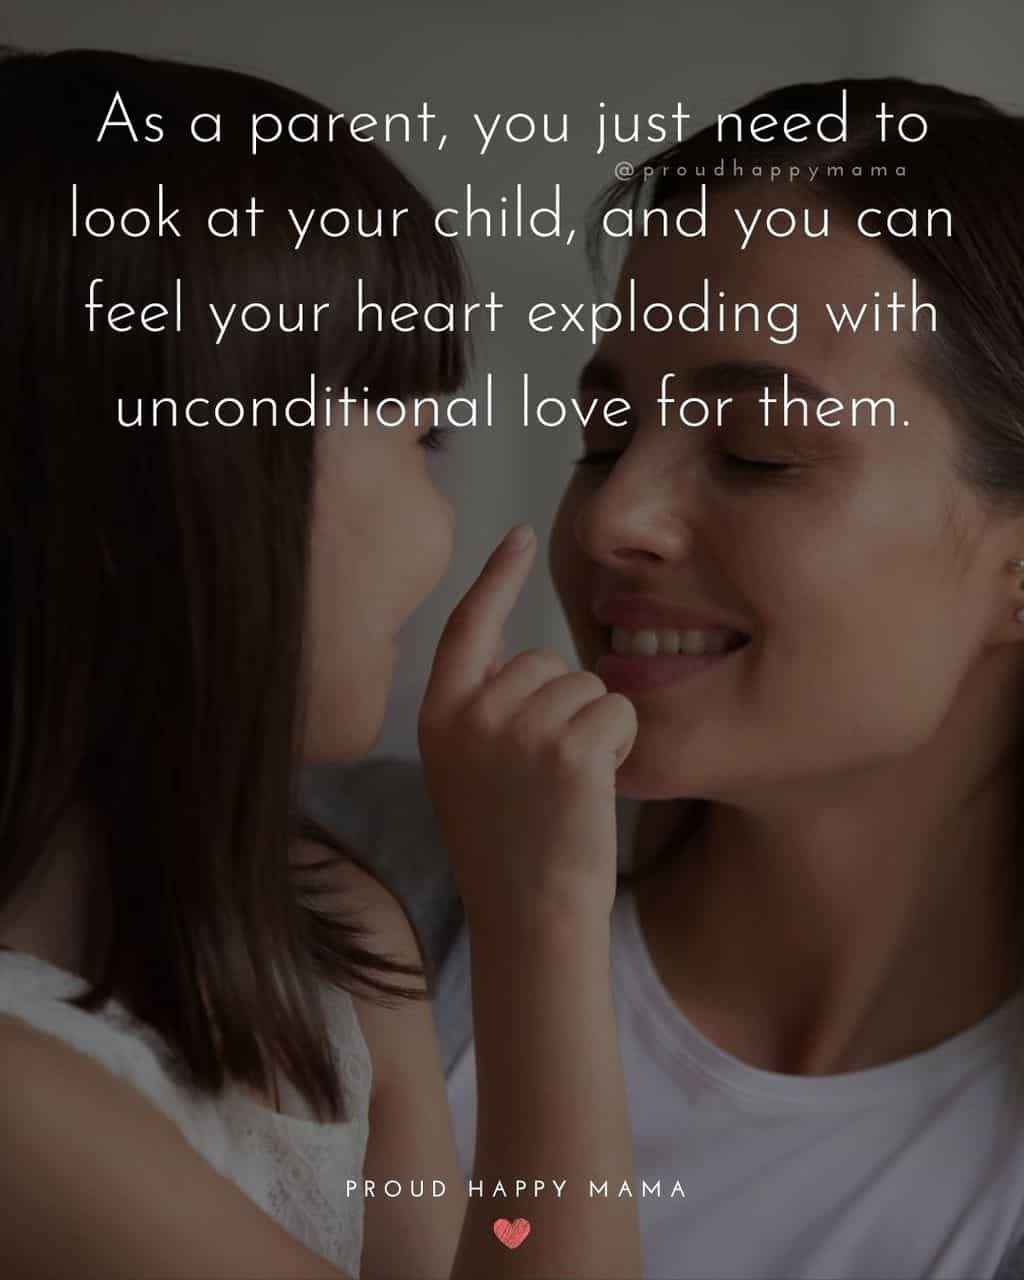 Parenting Quotes - As a parent, you just need to look at your child, and you can feel your heart exploding with unconditional love for